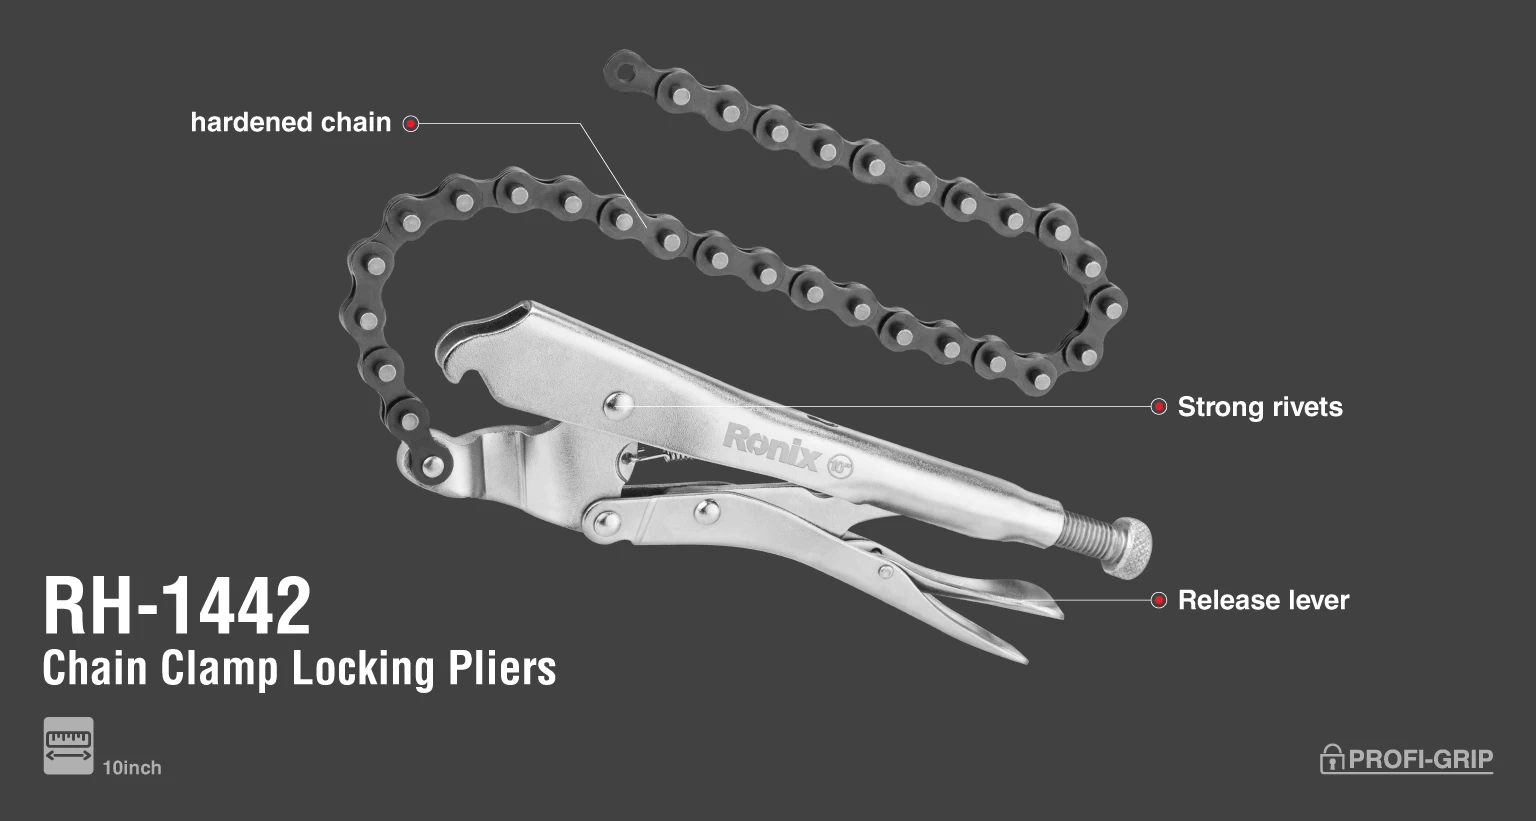 Chain Clamp Locking Pliers 10 inch_details